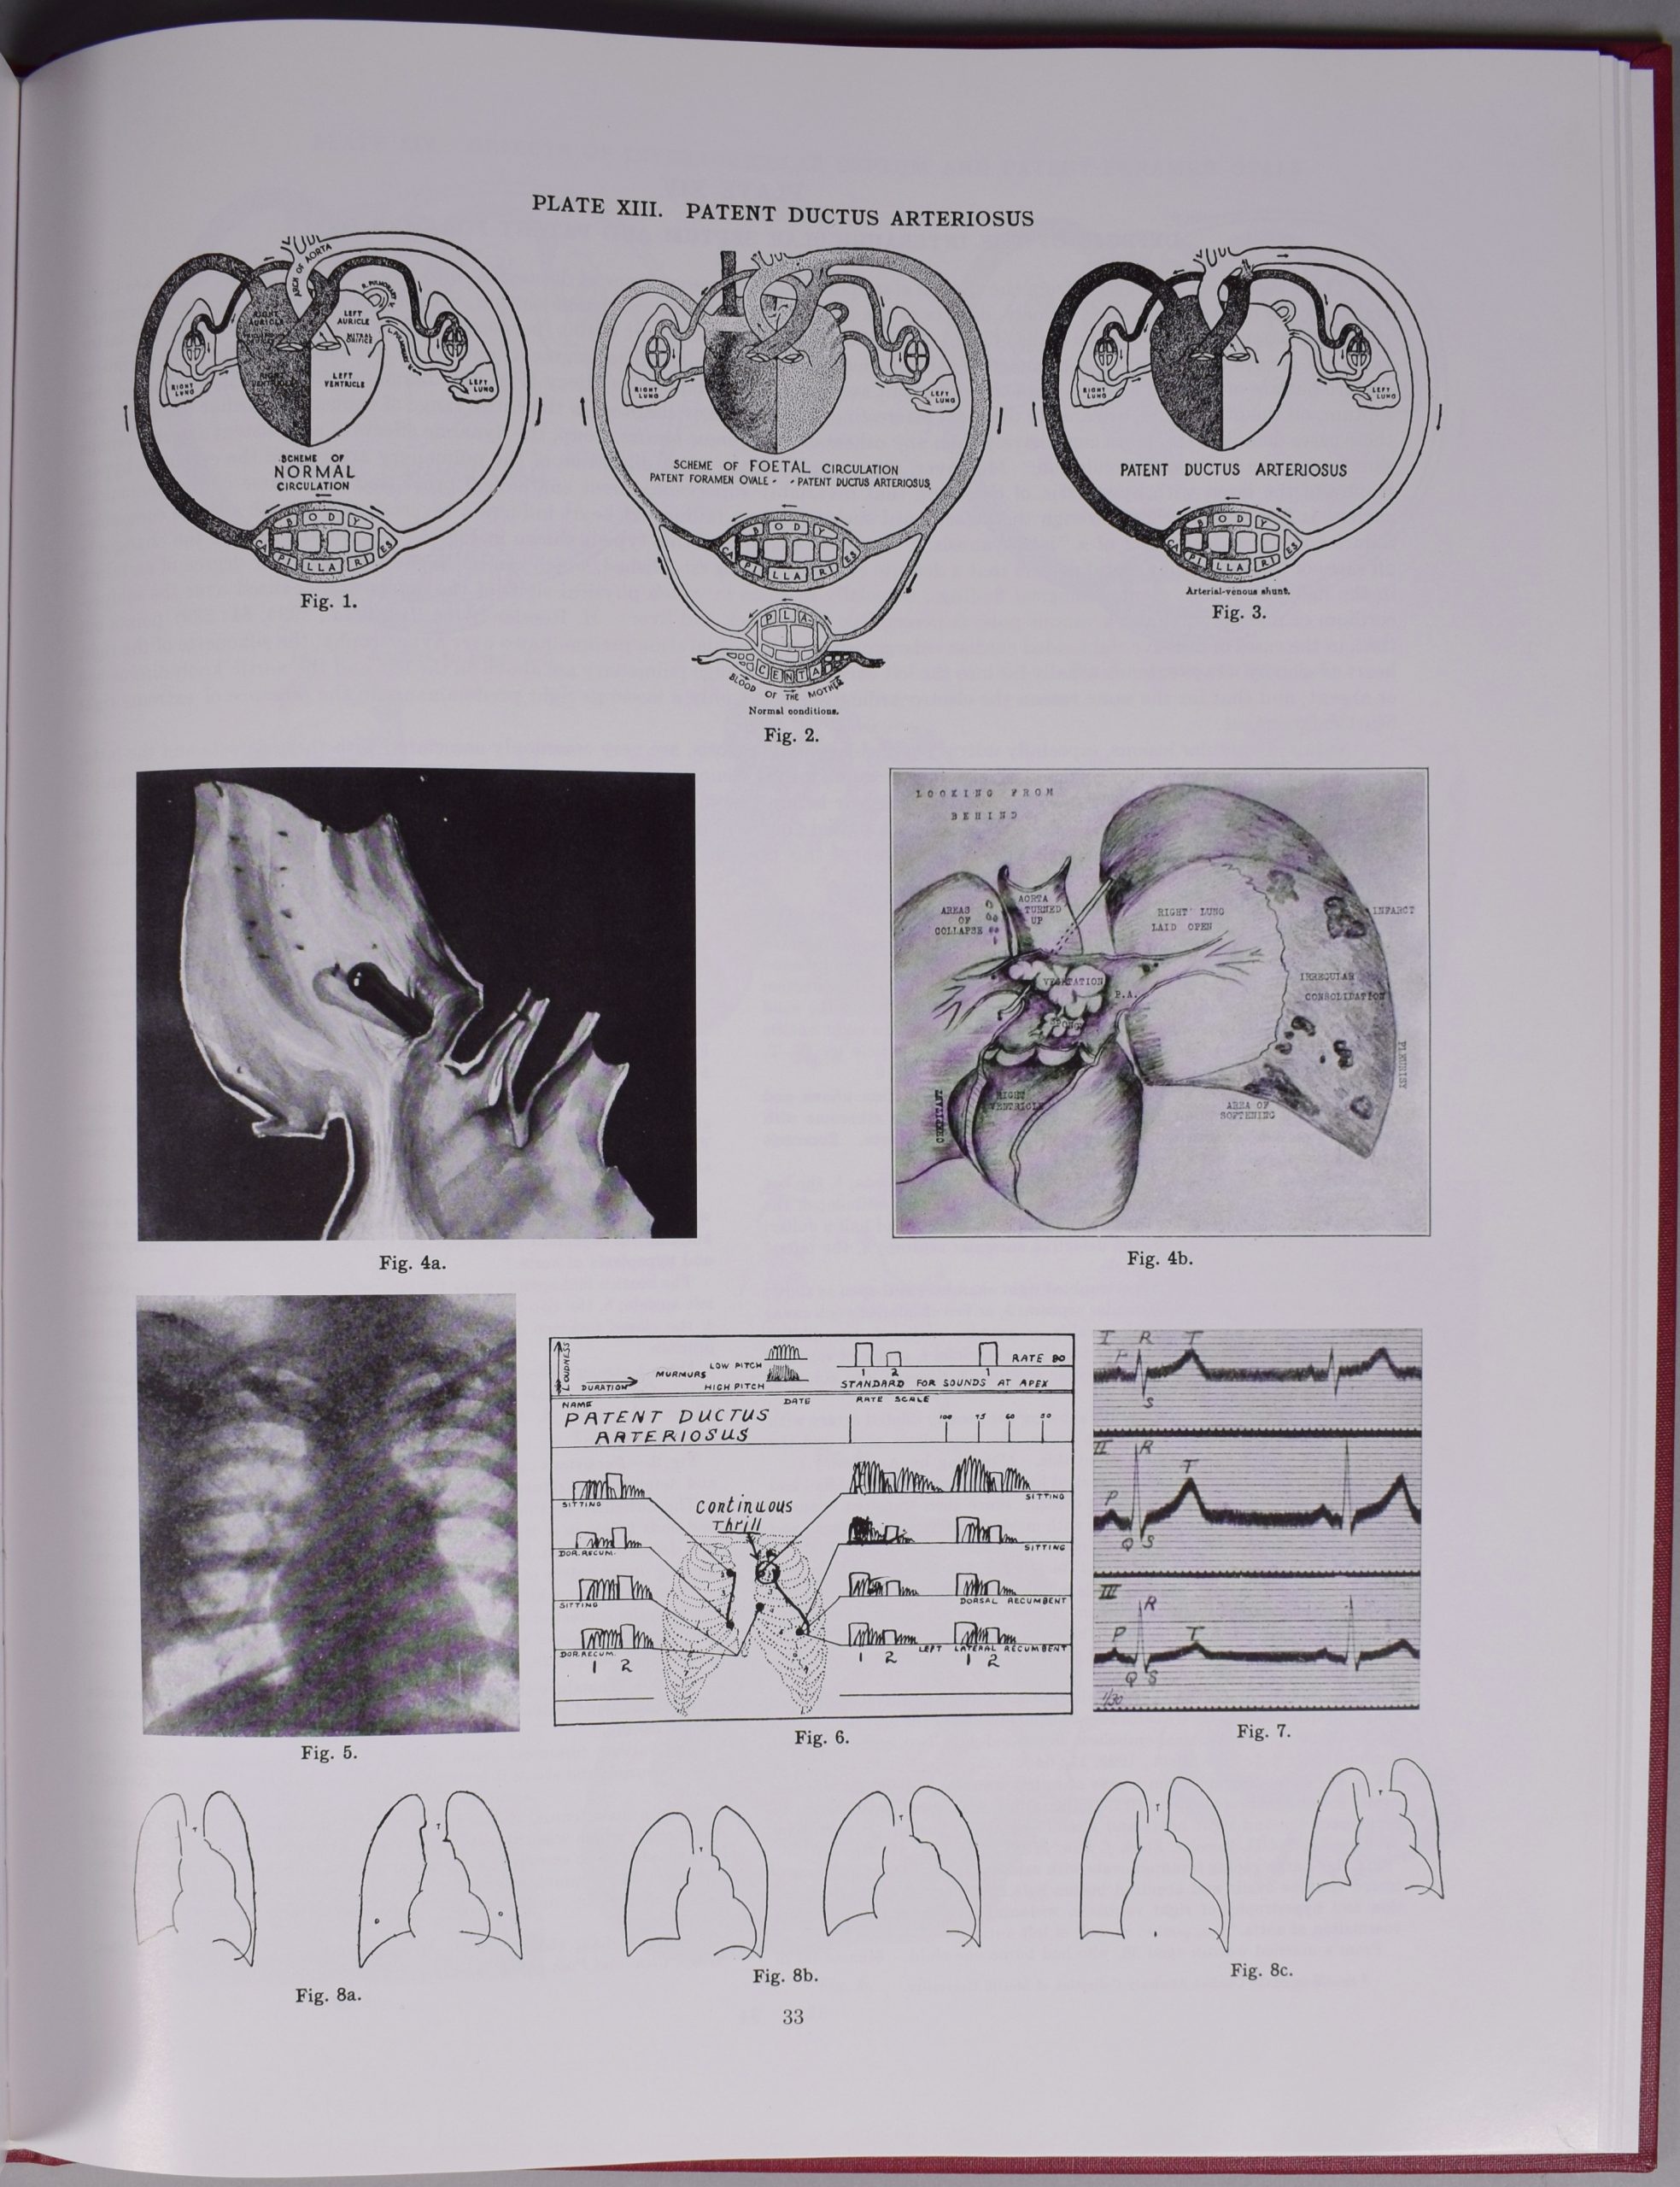 Photograph of page 33 of the Atlas of Congenital Cardiac Disease by Maude Abbott, black and white. The page is titles “Plate XIII. Patent Ductus Arteriosus” and contains 11 figures illustrating cardiac arteries.